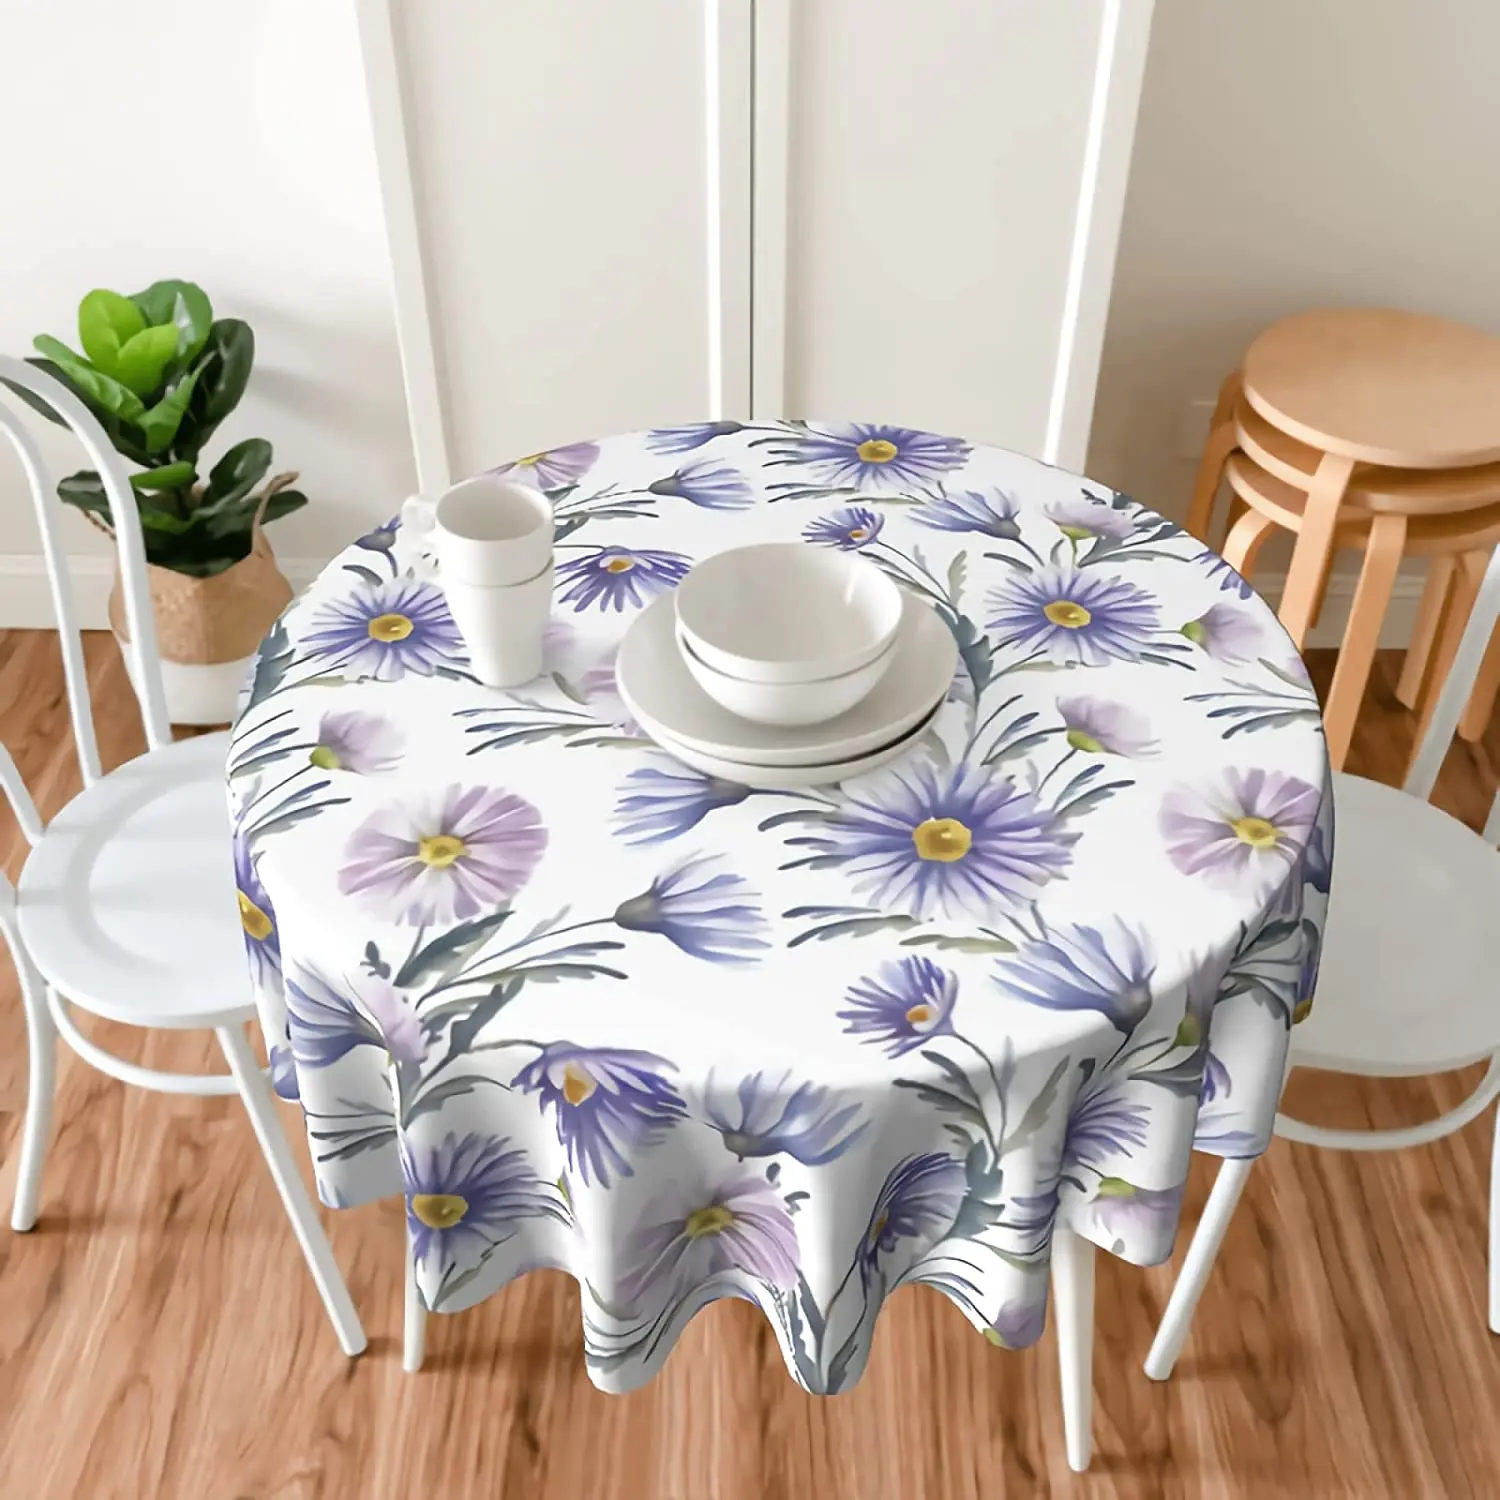 

Farmhouse Flowers Tablecloth Round 60 Inch Table Cover Wrinkle-Resistant Waterproof for Kitchen Home Decoration Picnic Outdoor